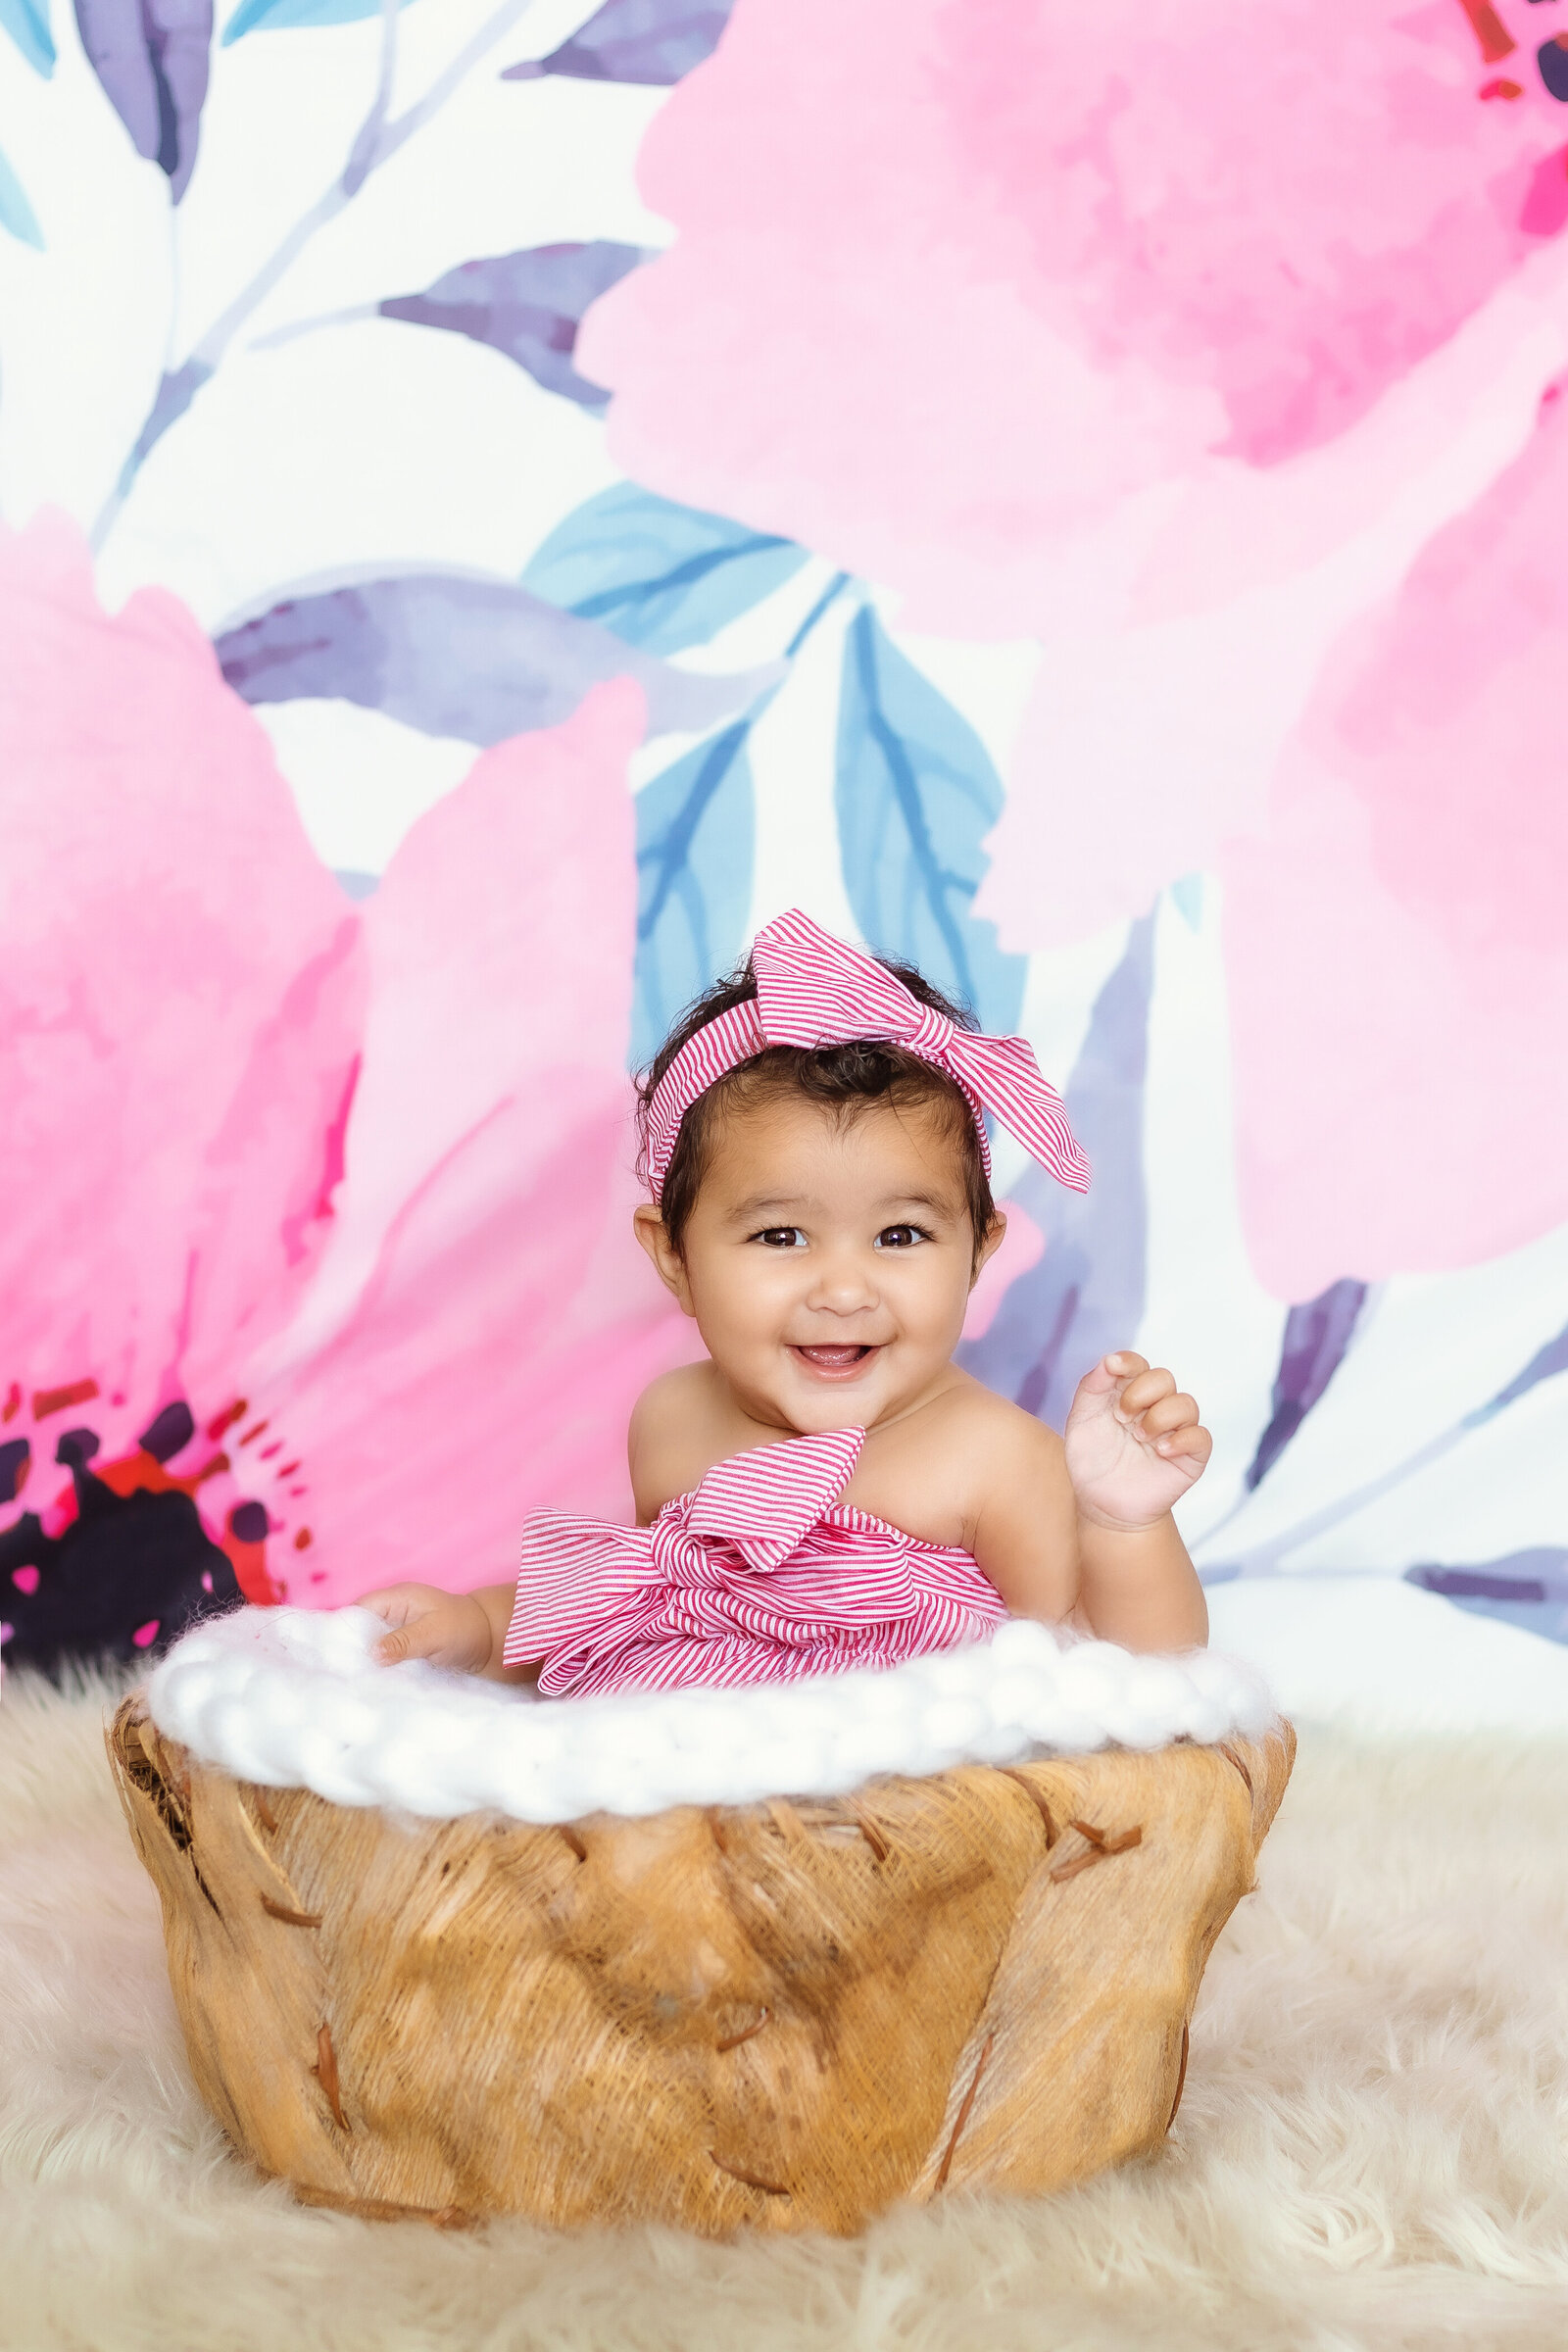 Milestone Photographer, a baby girl with bow in her hair sits in a small basket